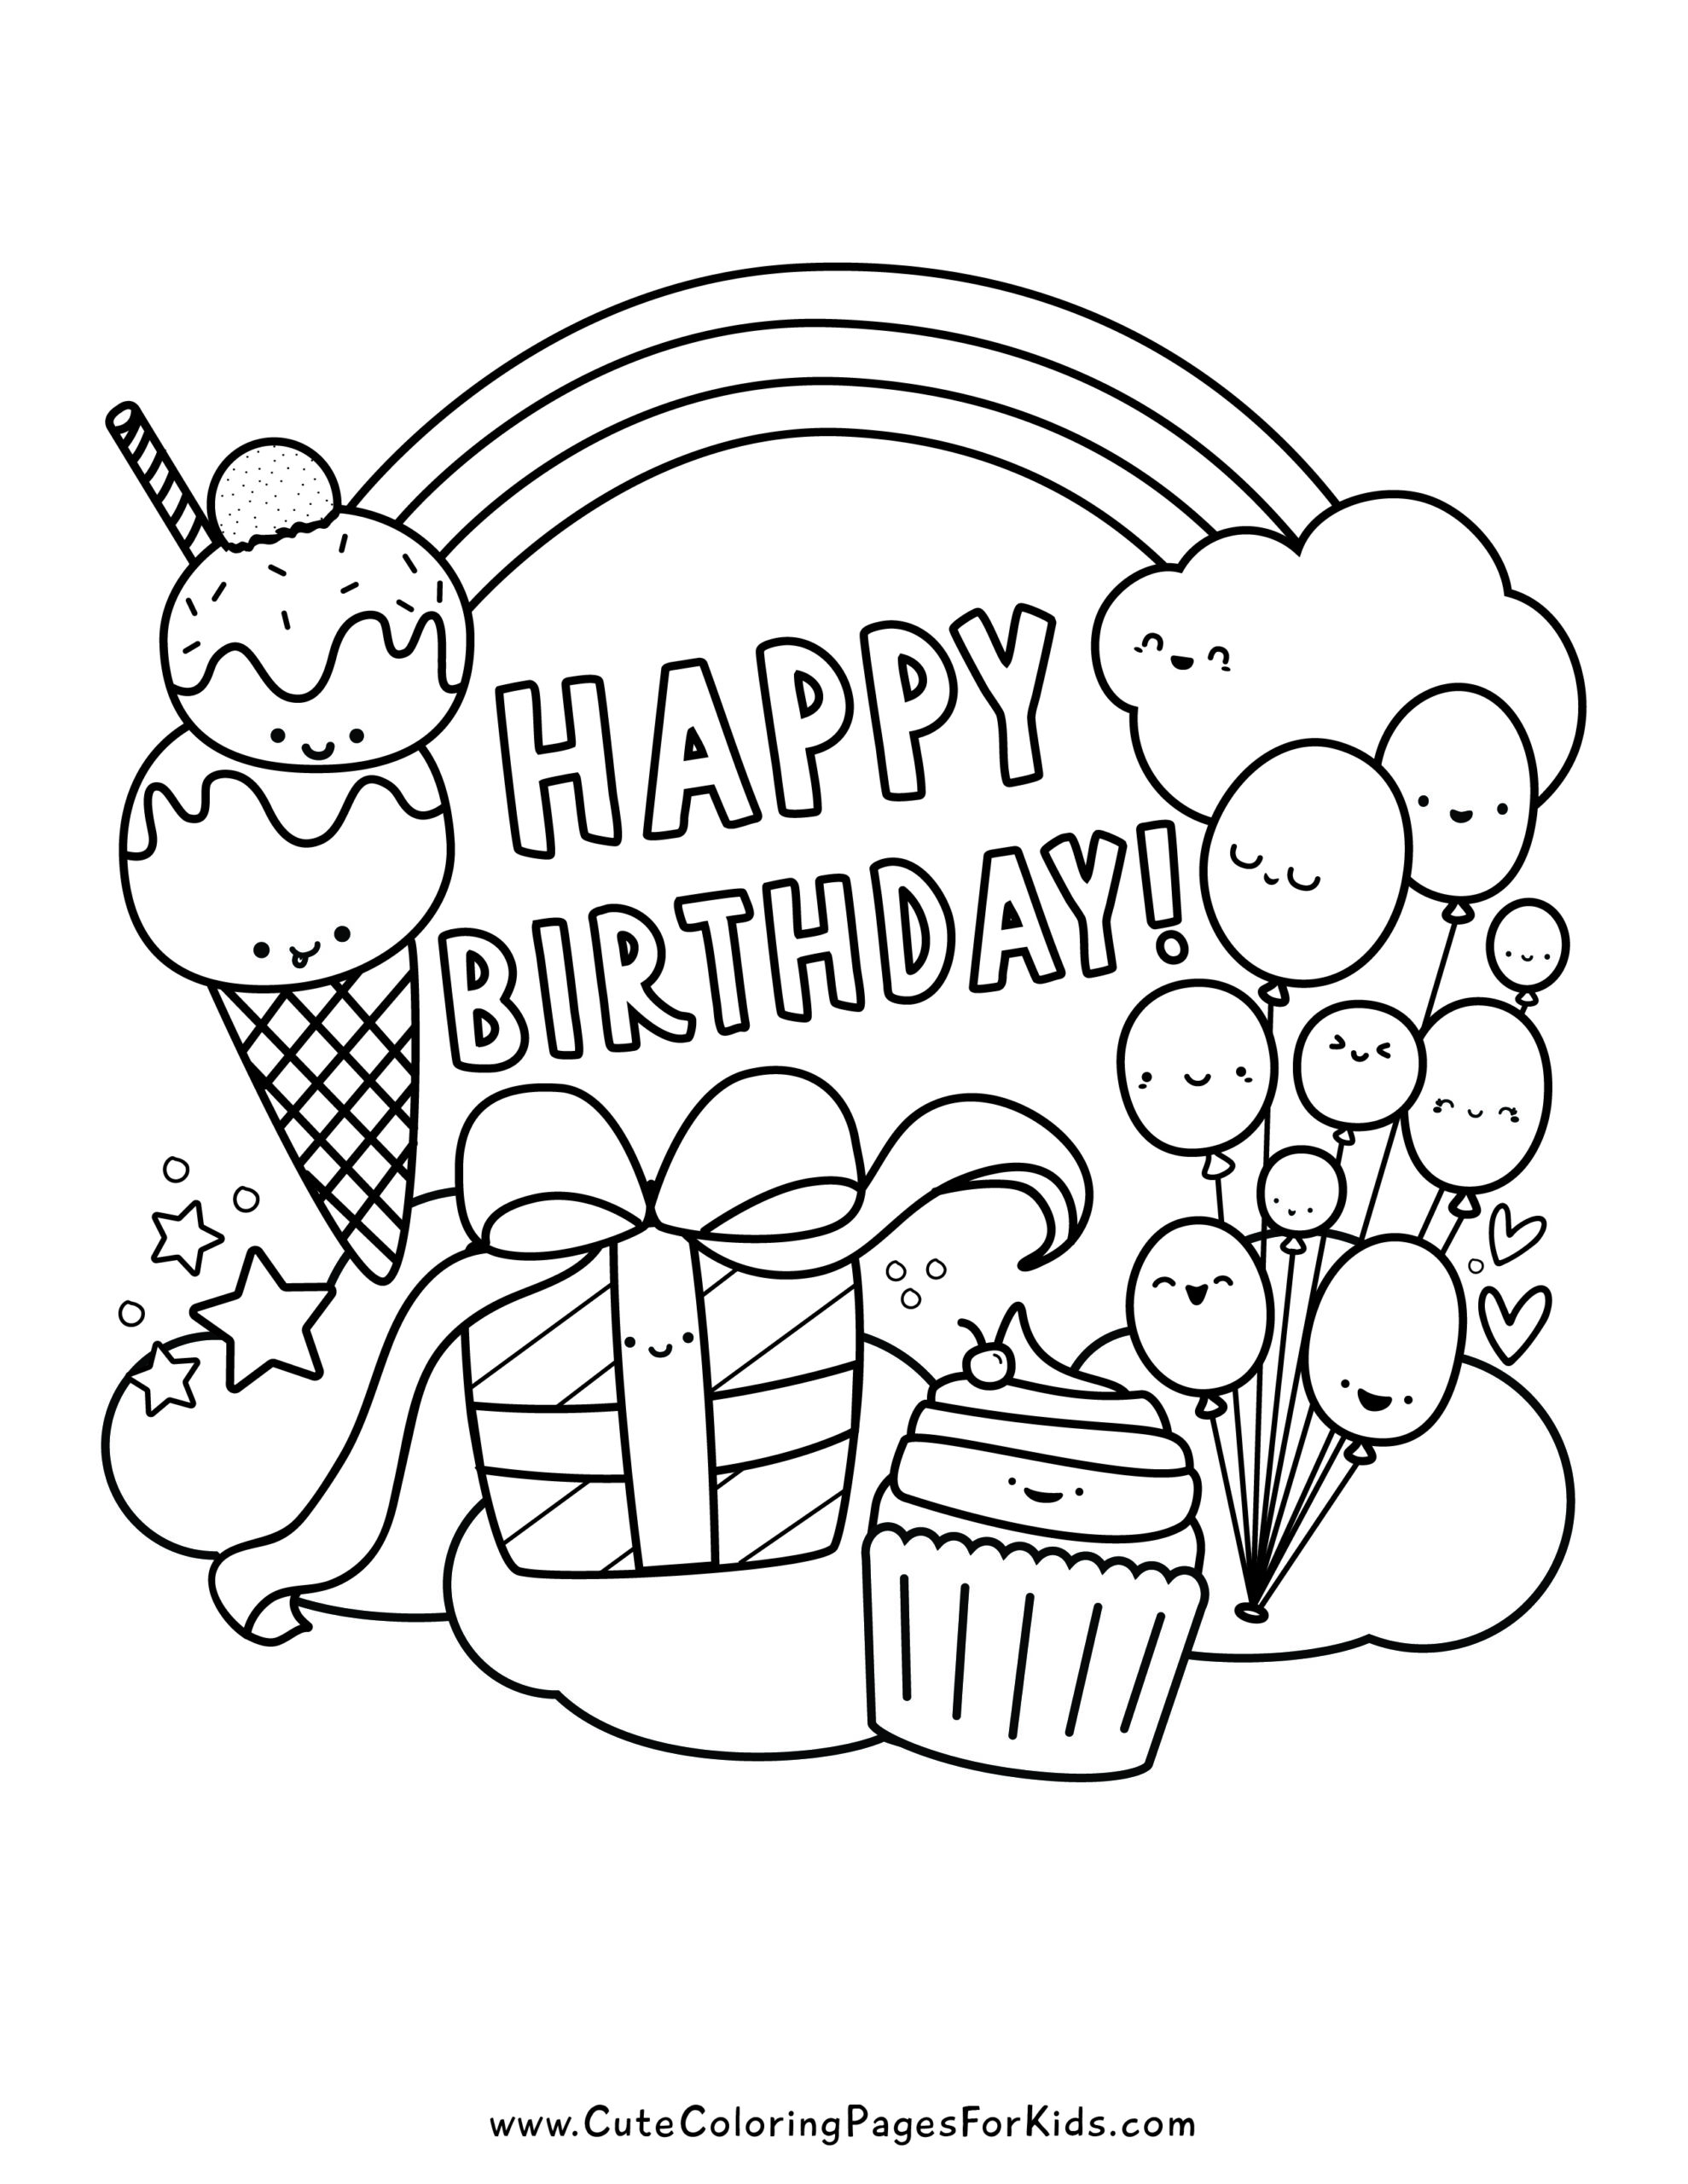 Free printable birthday coloring pages